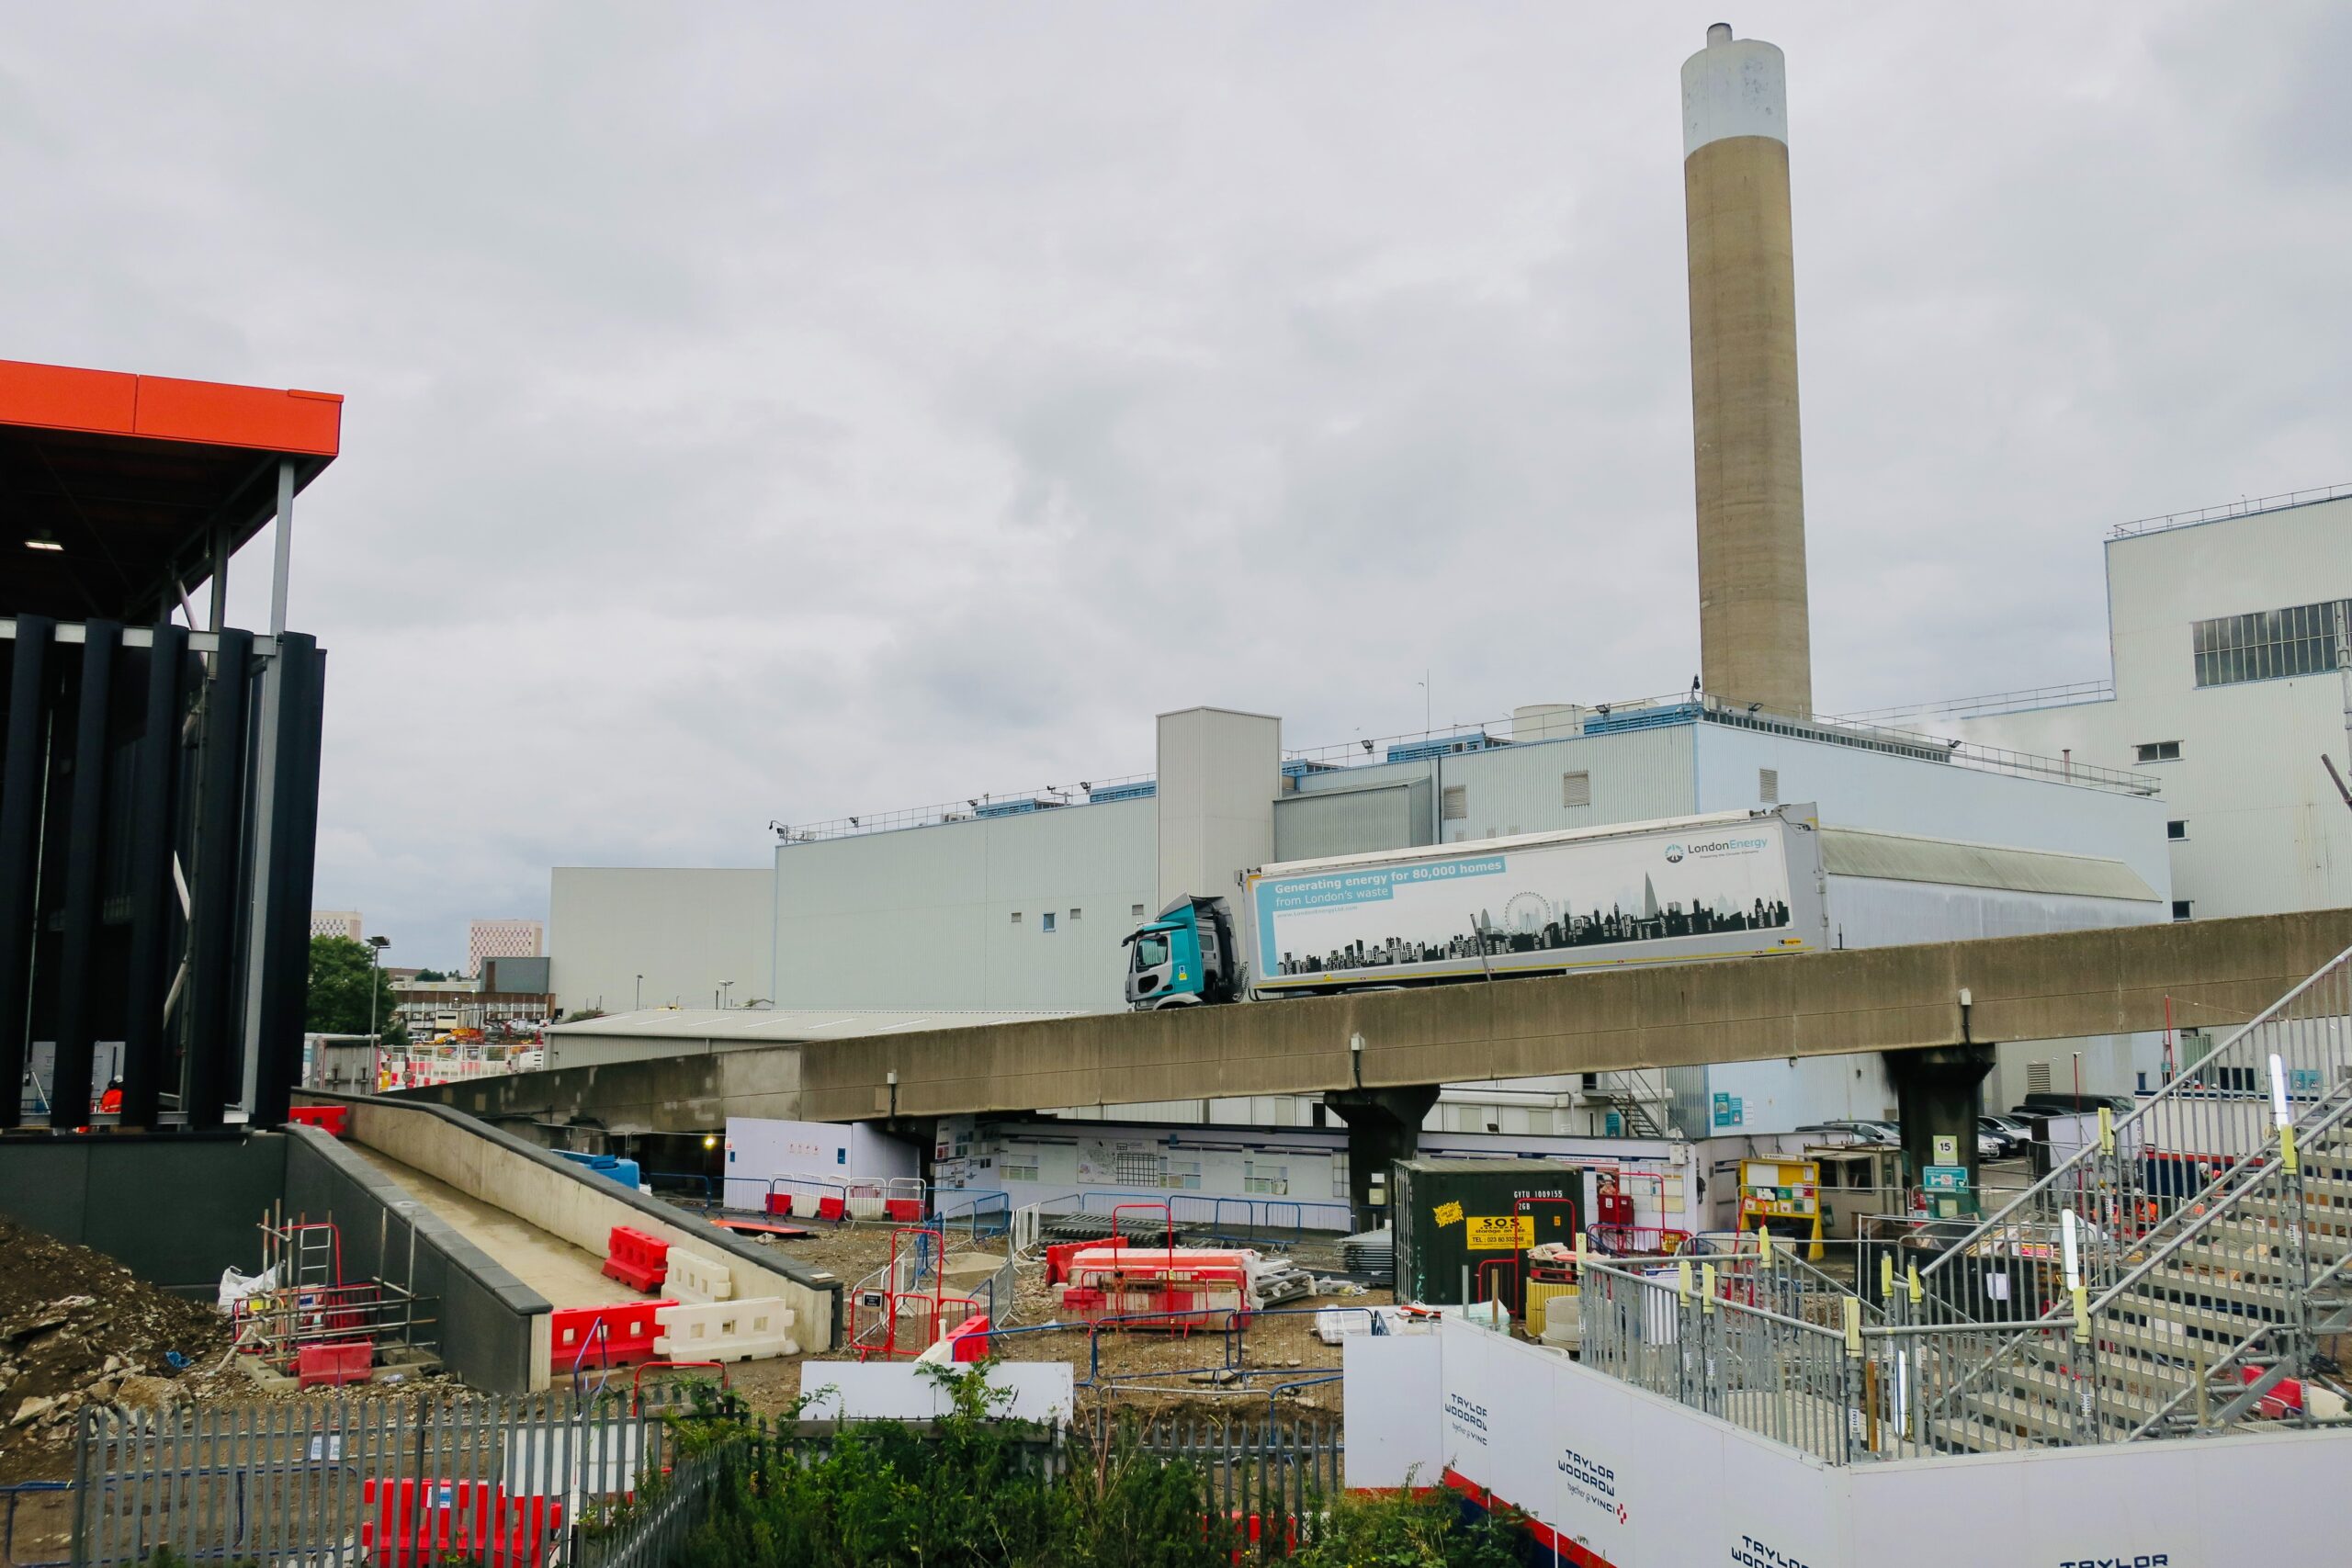 energy from waste recovery plant in the UK.